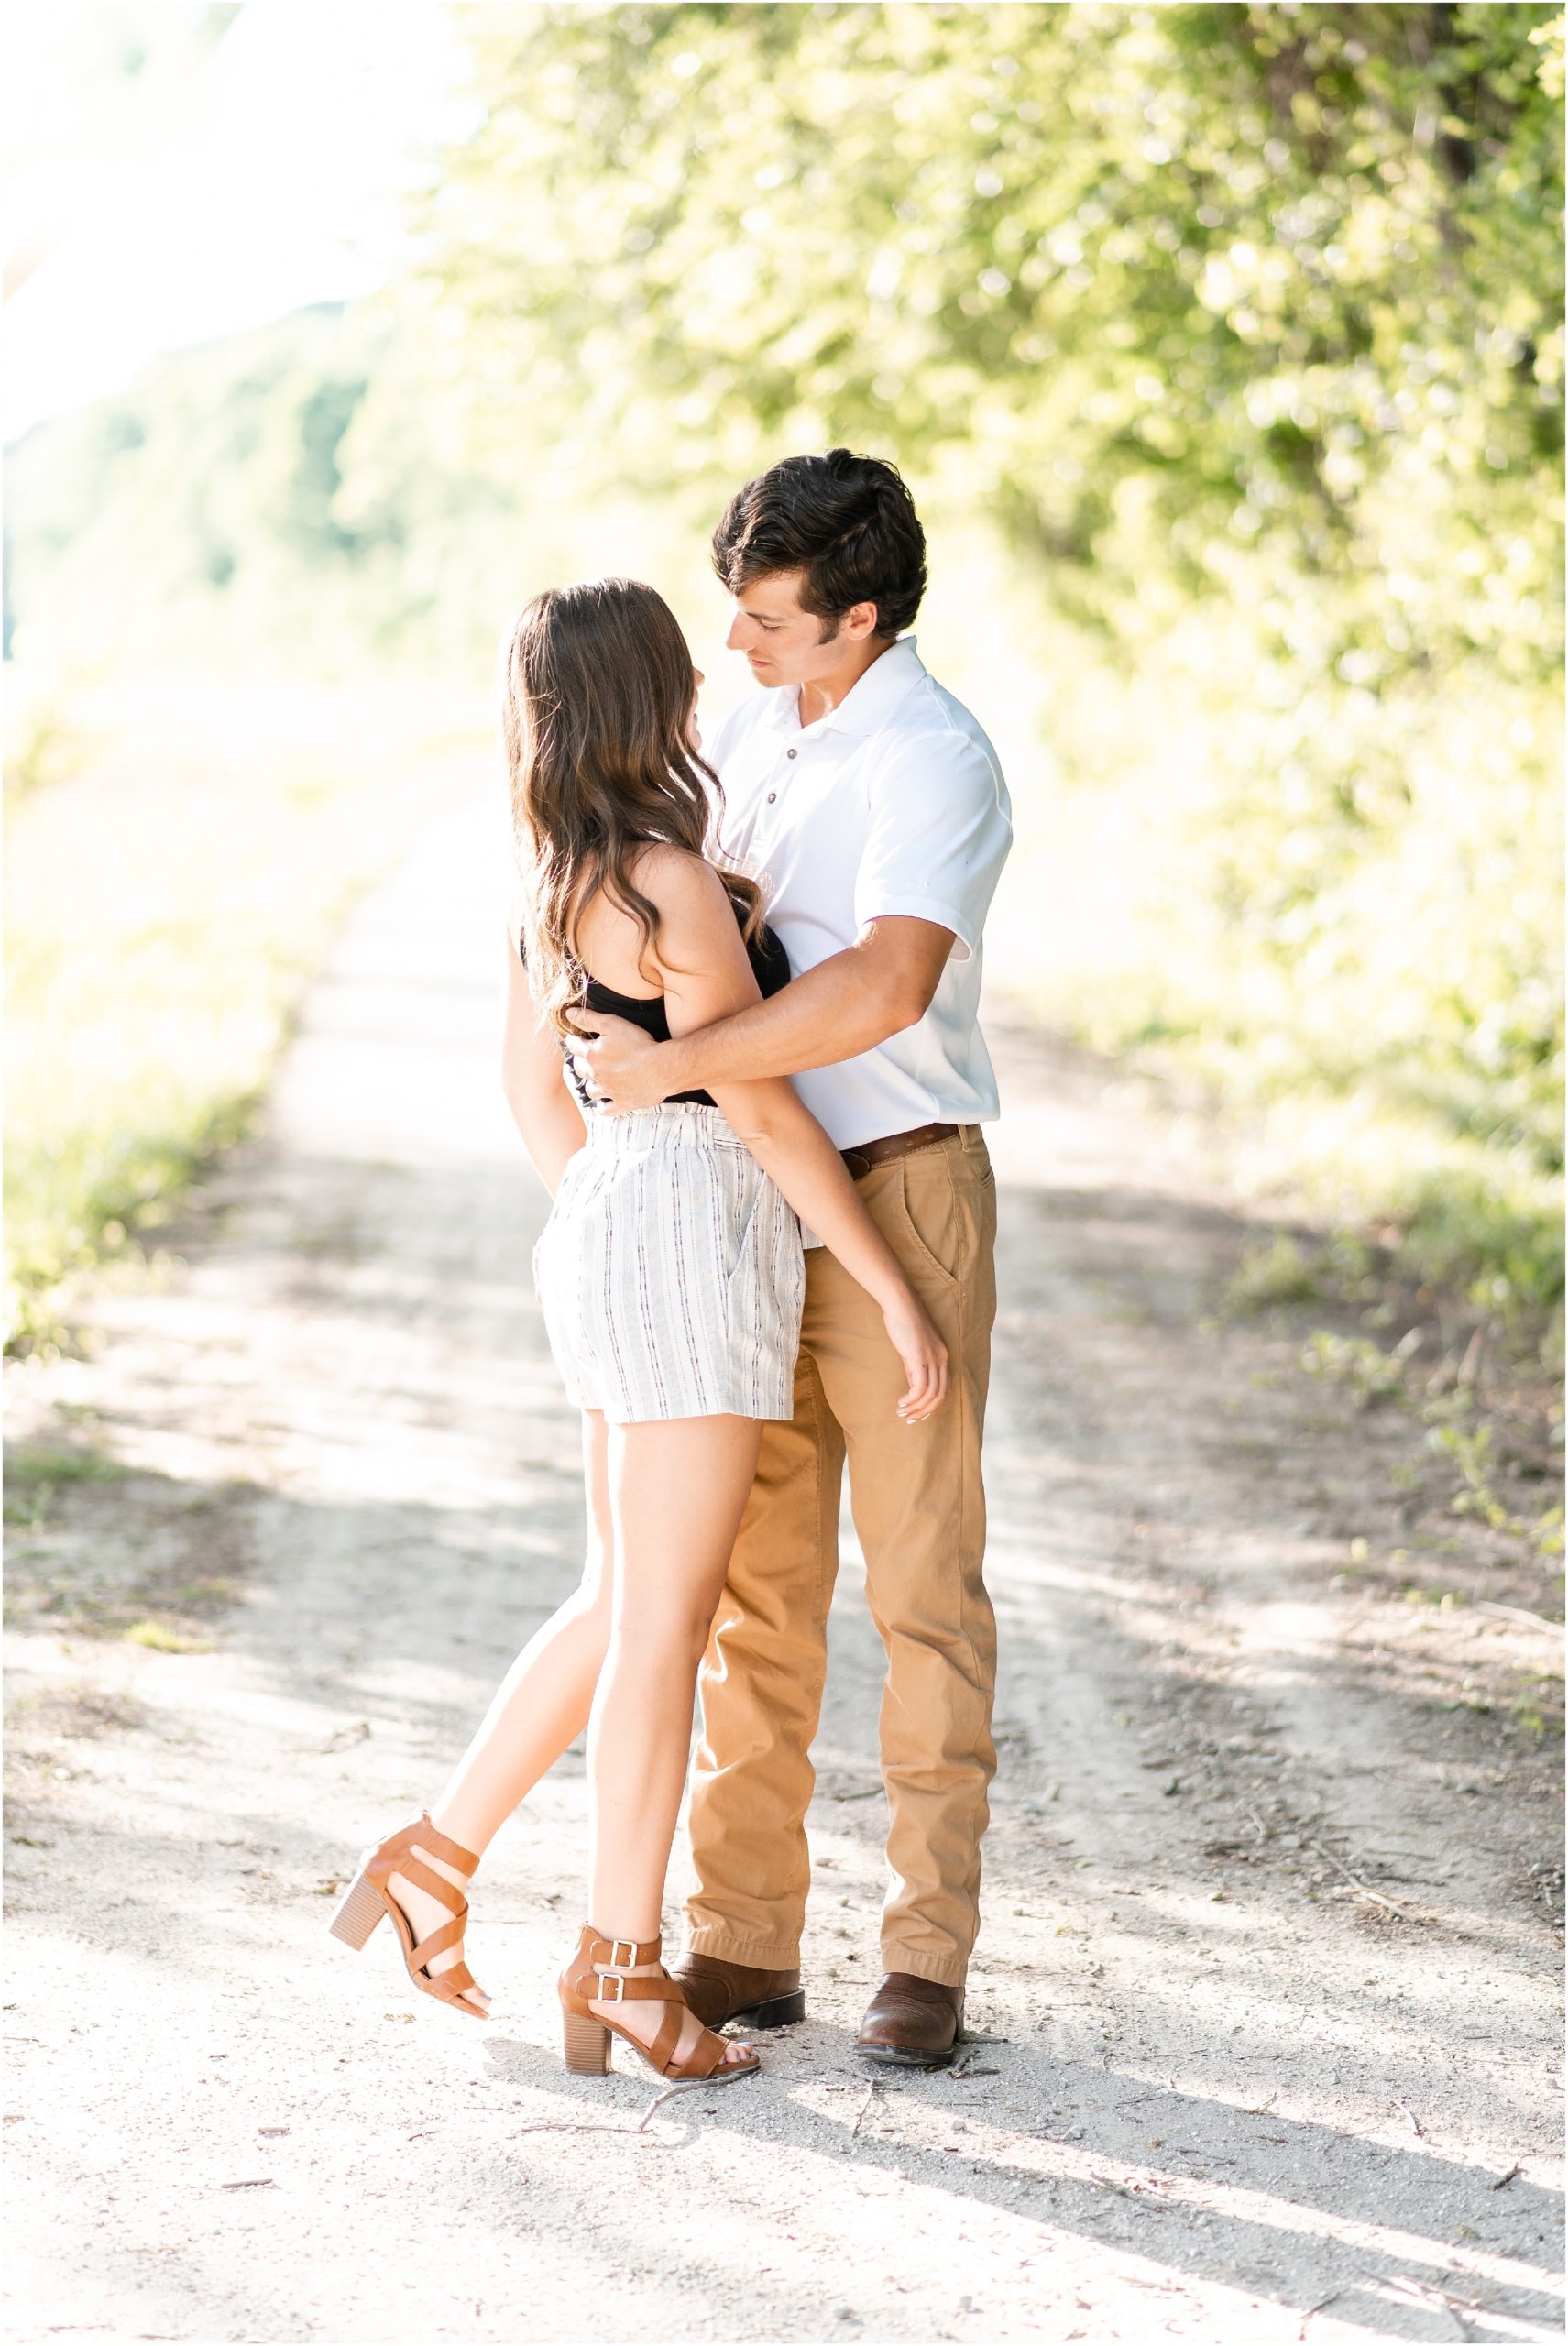 couple embracing in sunlight on gravel path during engagement session